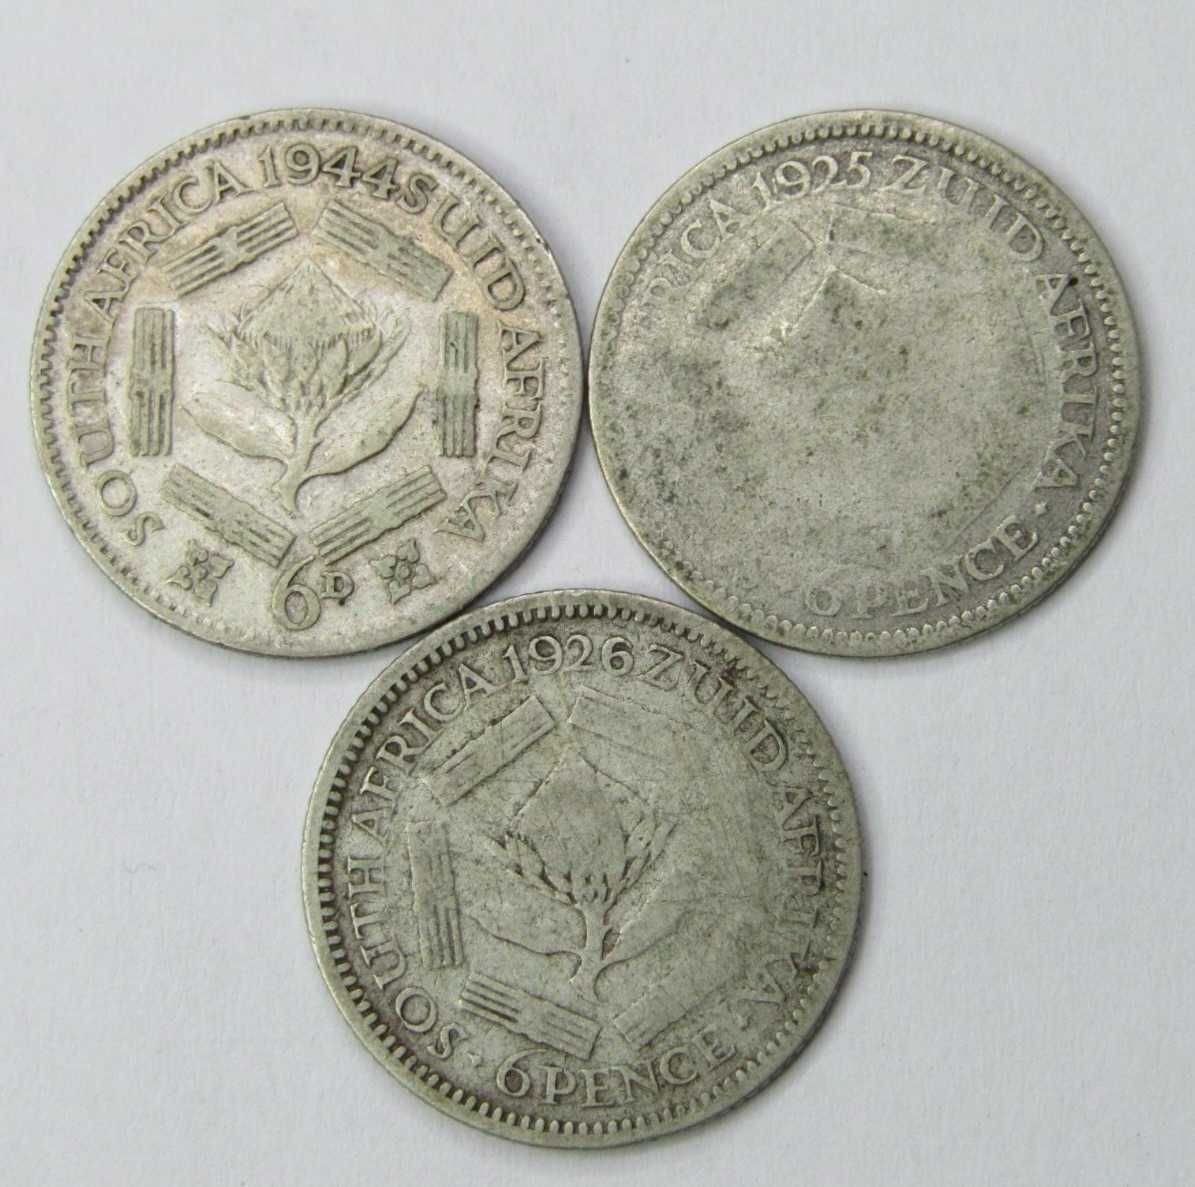 Three South African Union Silver Sixpences - 1925, 1926 and 1946